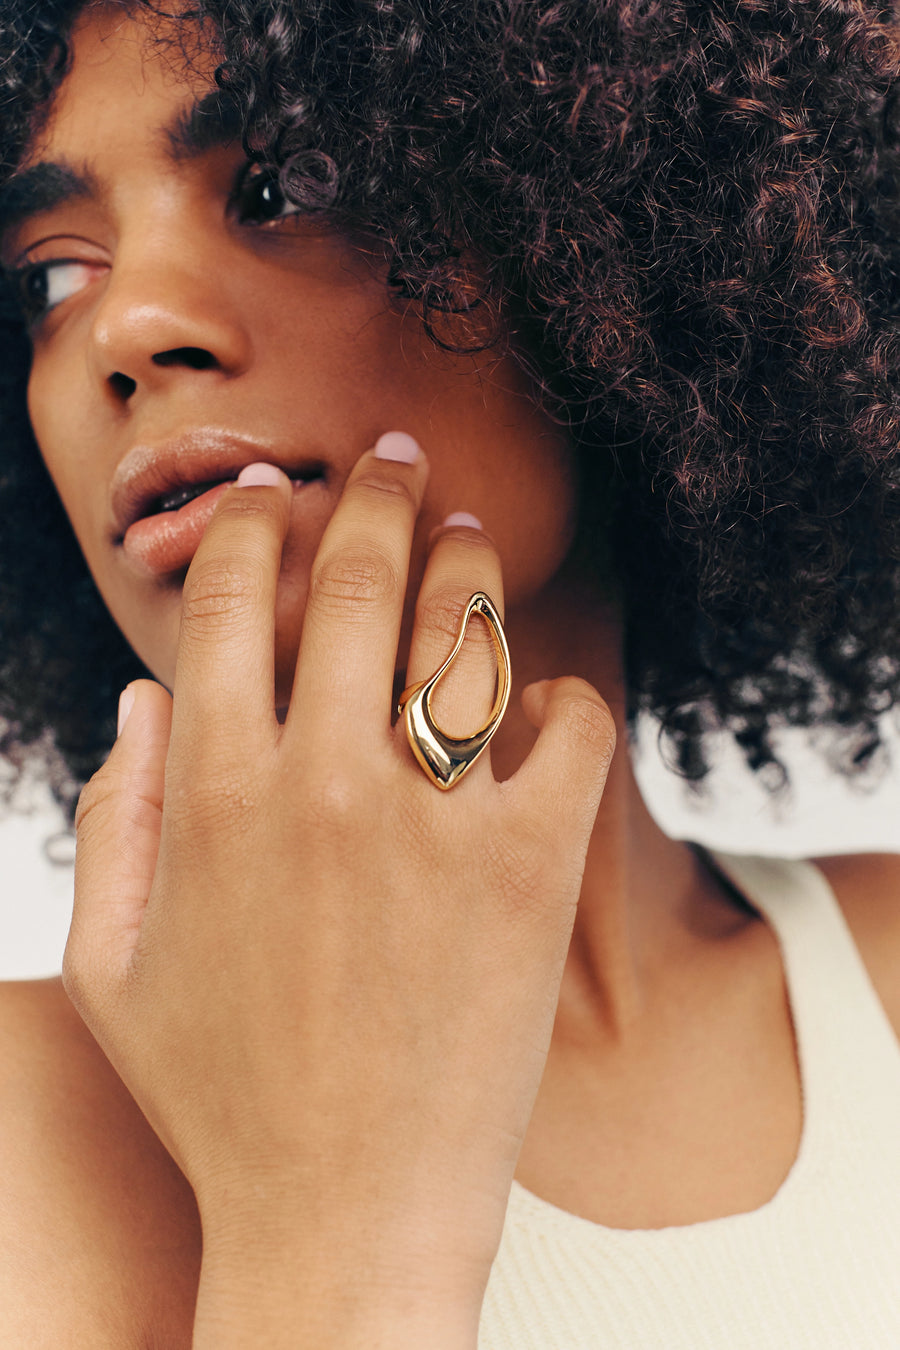 PARIS Ring. Ring topped with abstract wavy form, open-ended, can fit with US sizes 5-7, 18K gold vermeil, handmade, hypoallergenic, water-resistant